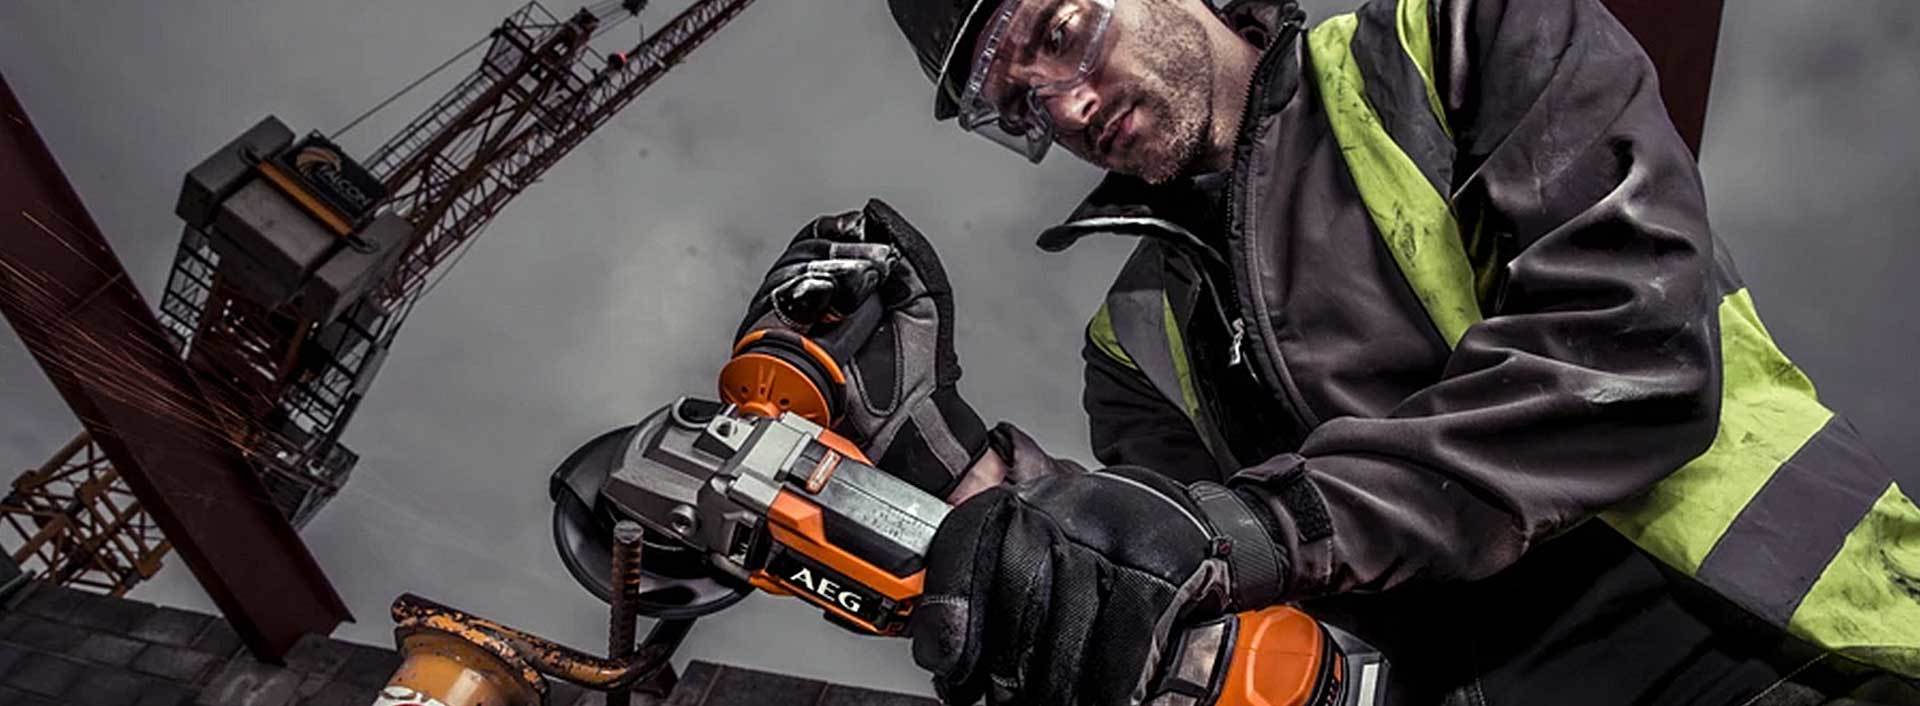 Power Tools Trouble-free solutions tailored to your needs